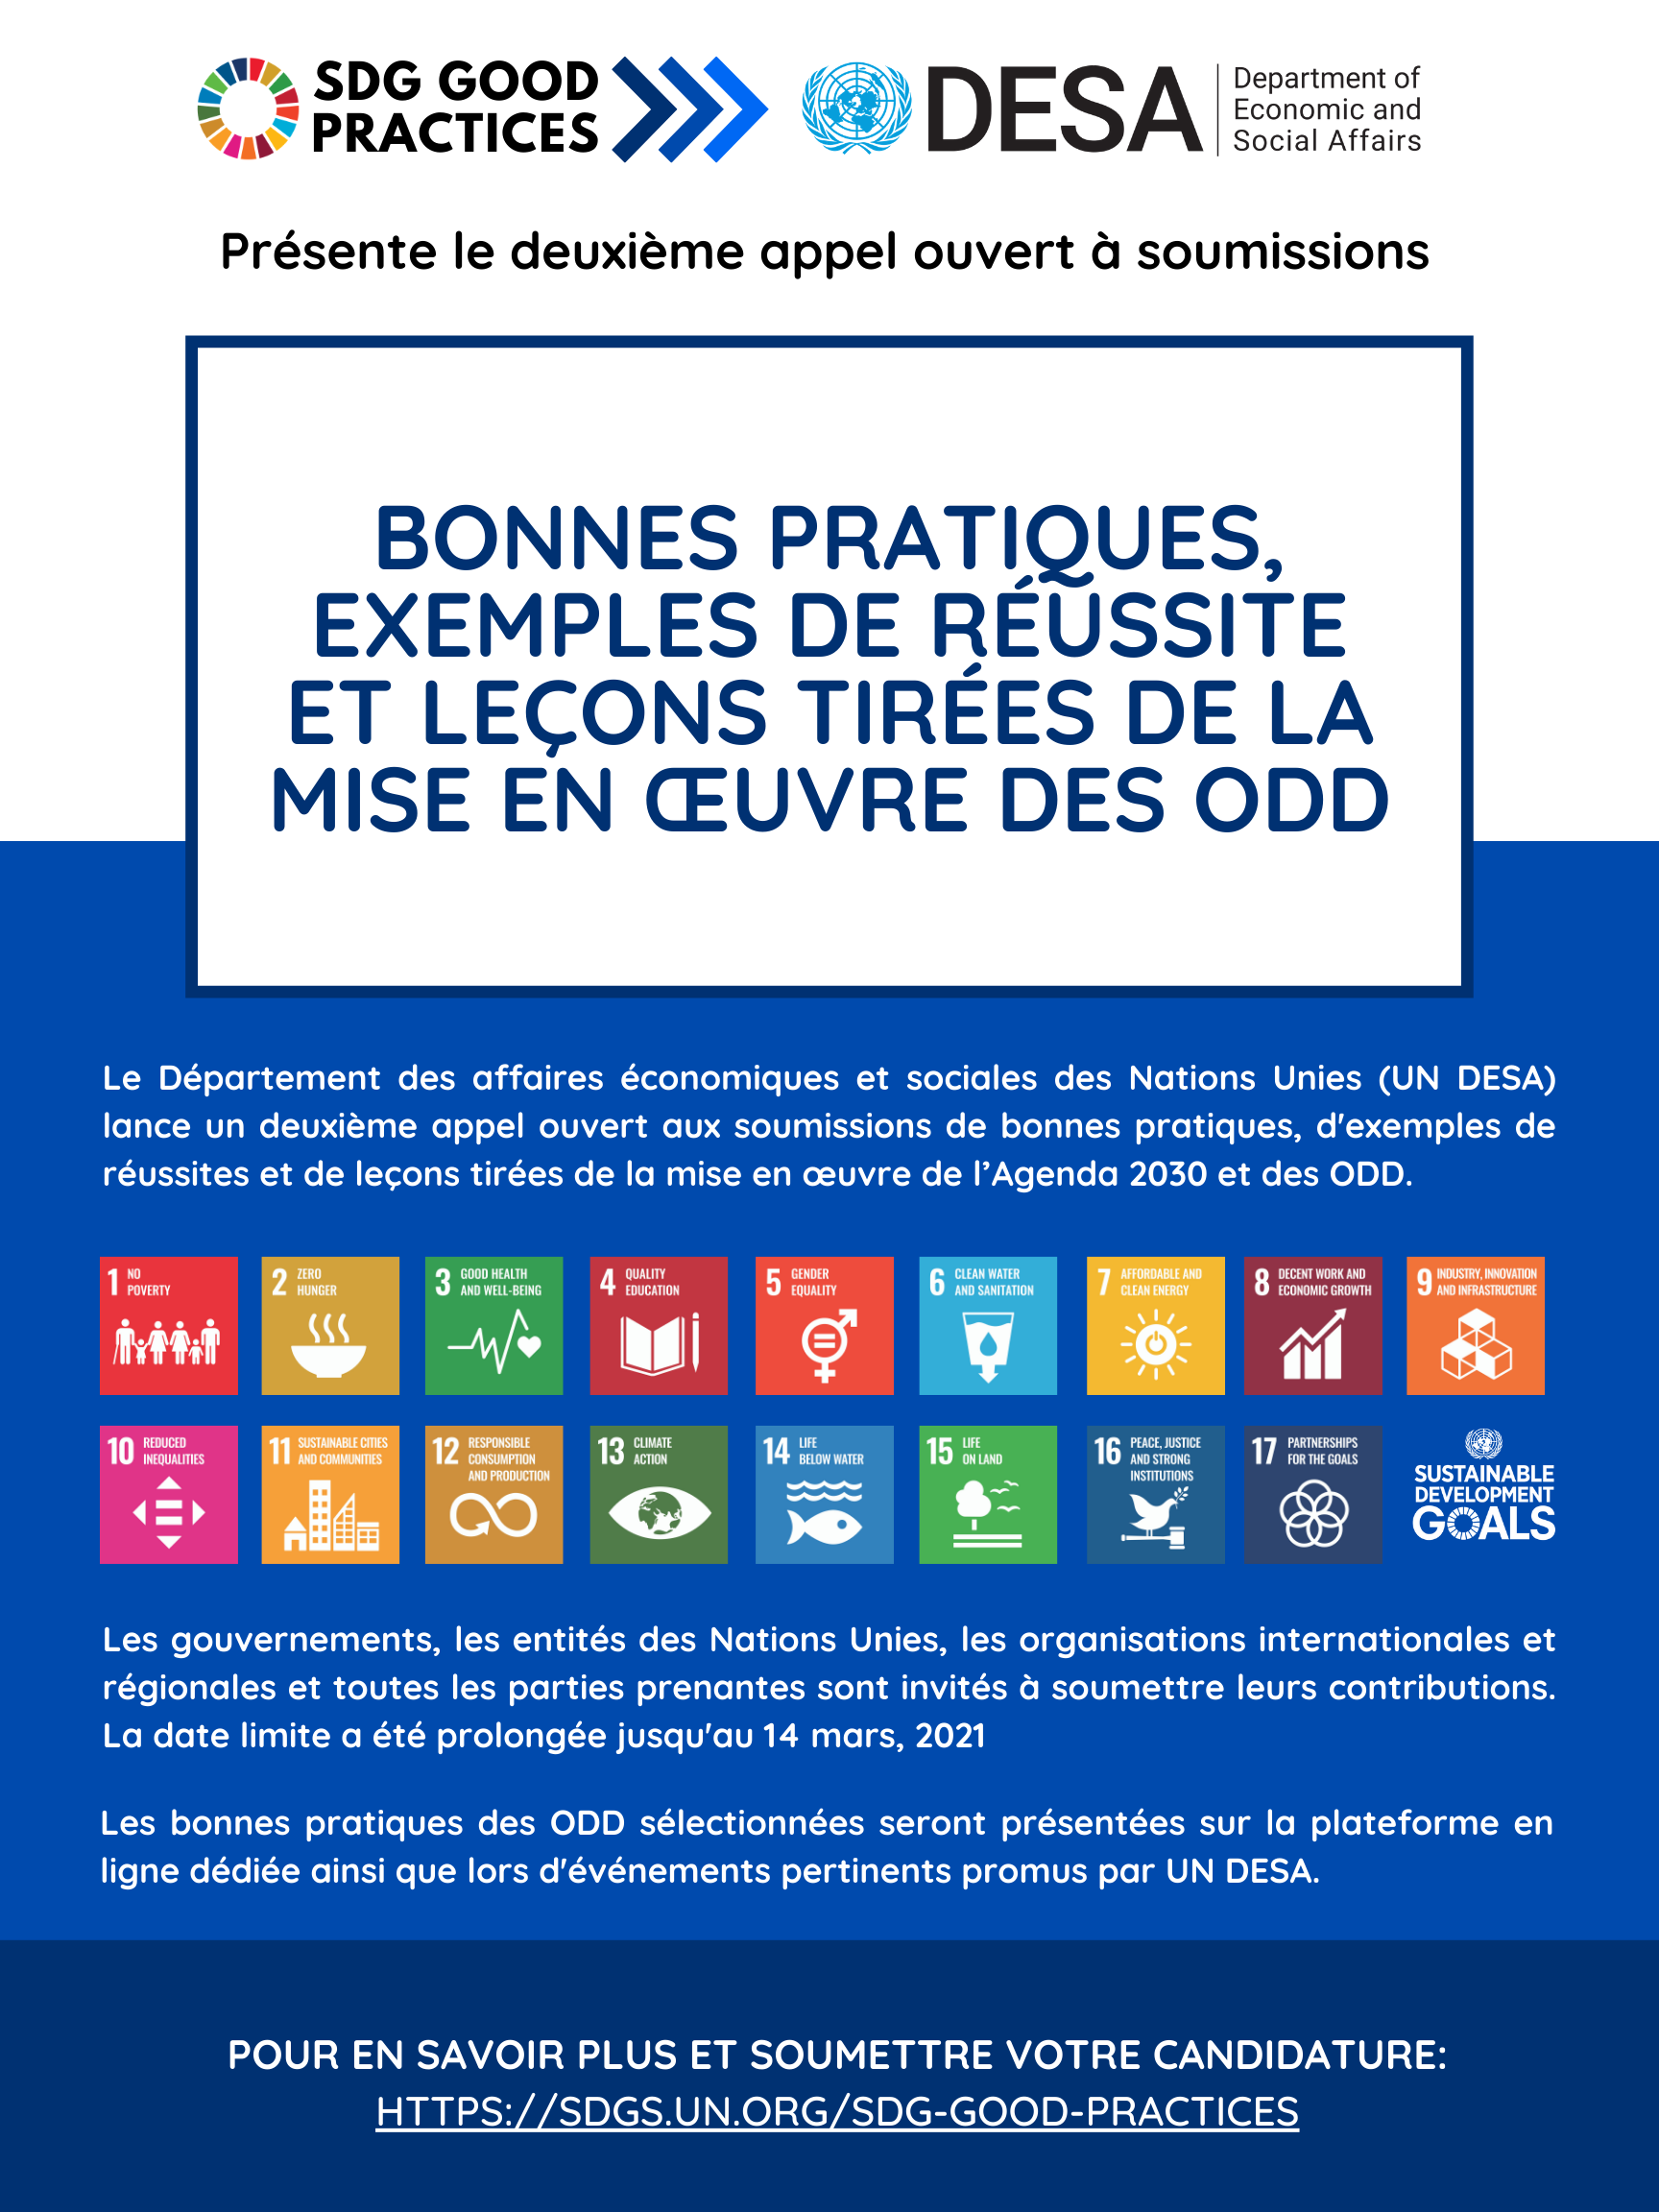 SDG Good Practices French Flyer